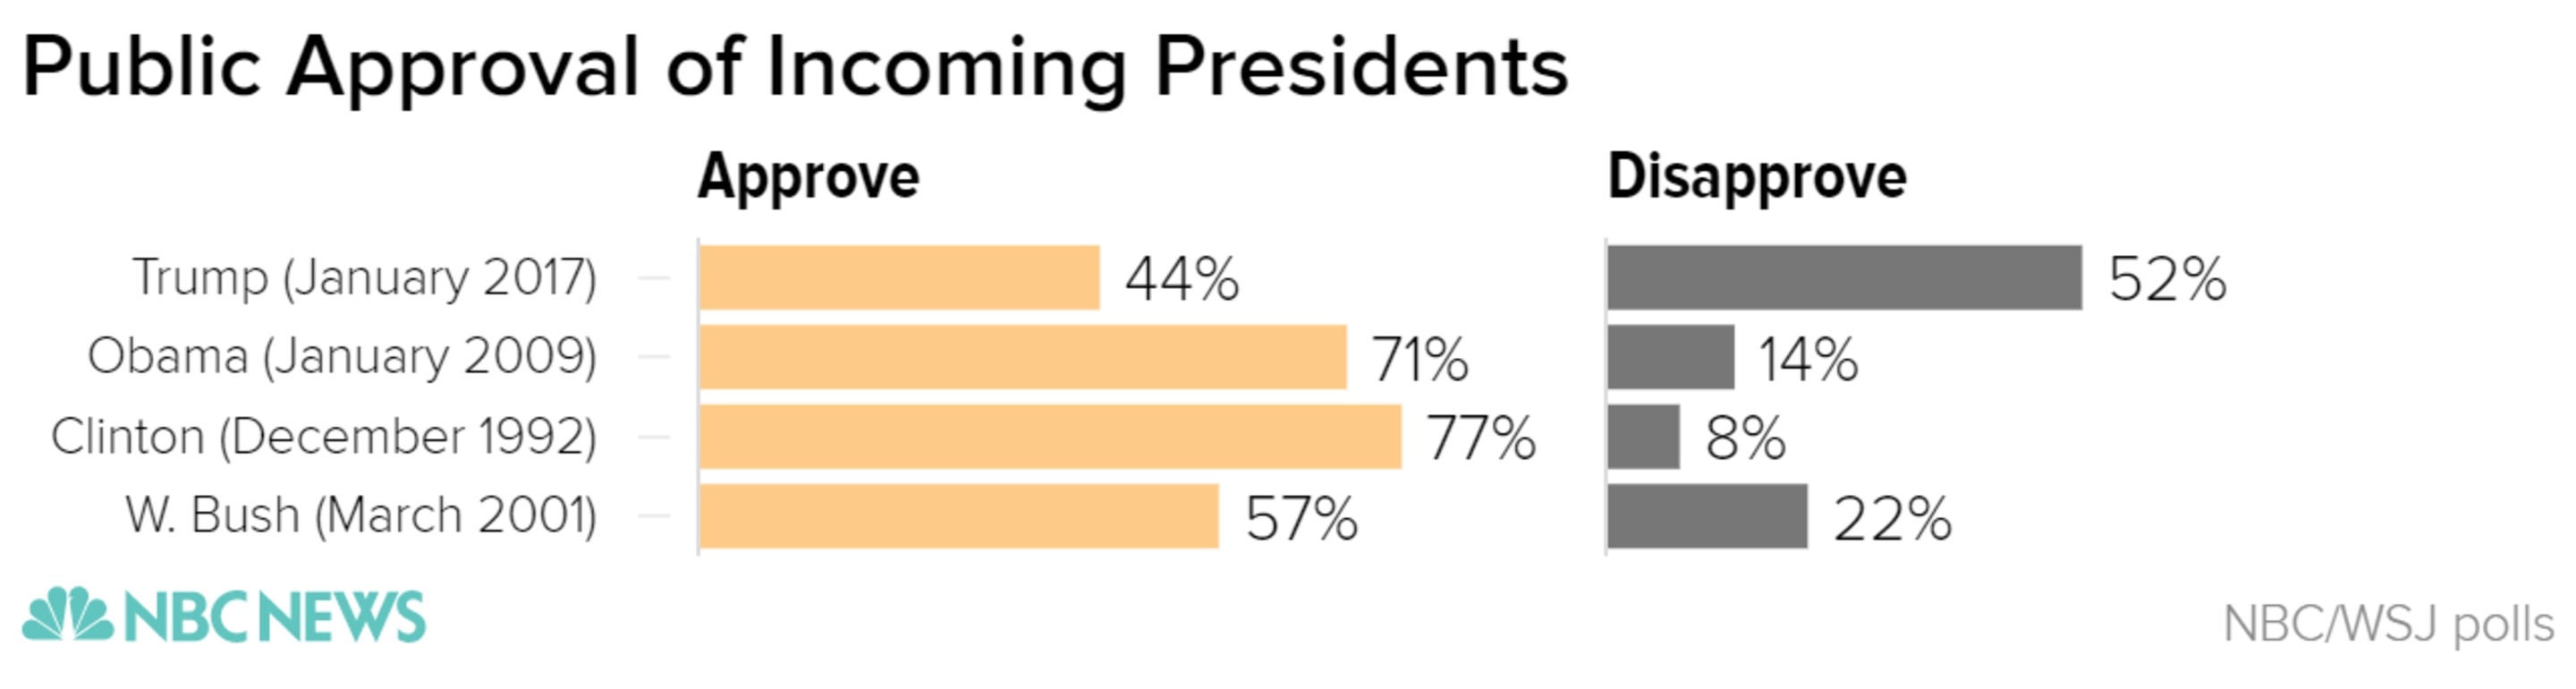 public_approval_of_incoming_presidents_approve_disapprove_chartbuilder_7be4ef85a48561da4abbff9ed278276d.nbcnews-ux-2880-1000.png